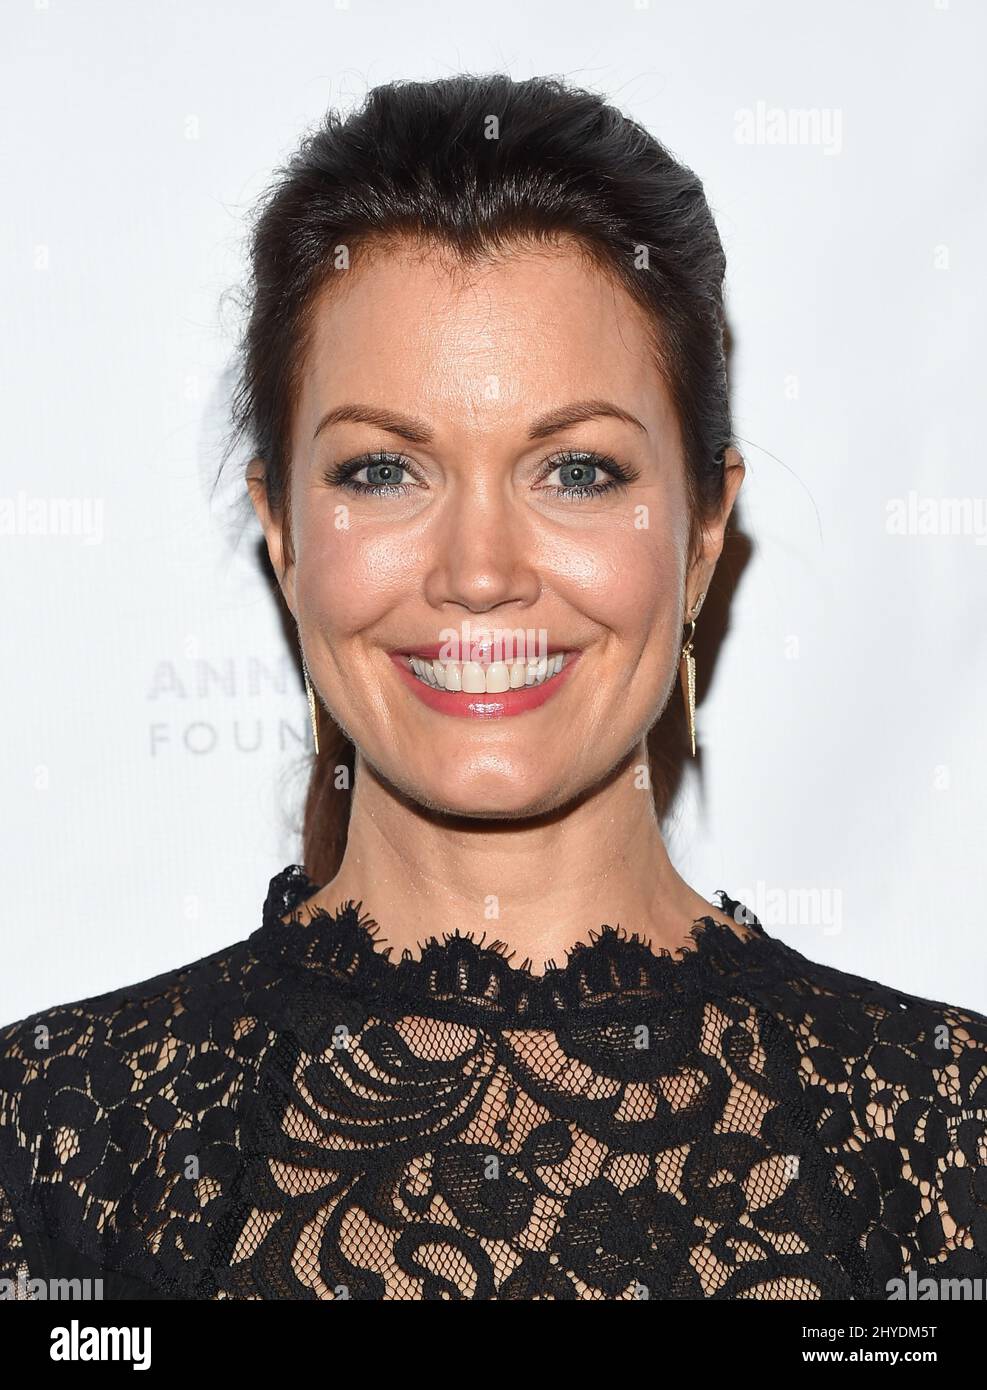 Bellamy Young attending the Sunday matinee of 'Turn Me Loose' at the Wallis Annenberg Center for the Performing Arts in Los Angeles, USA Stock Photo